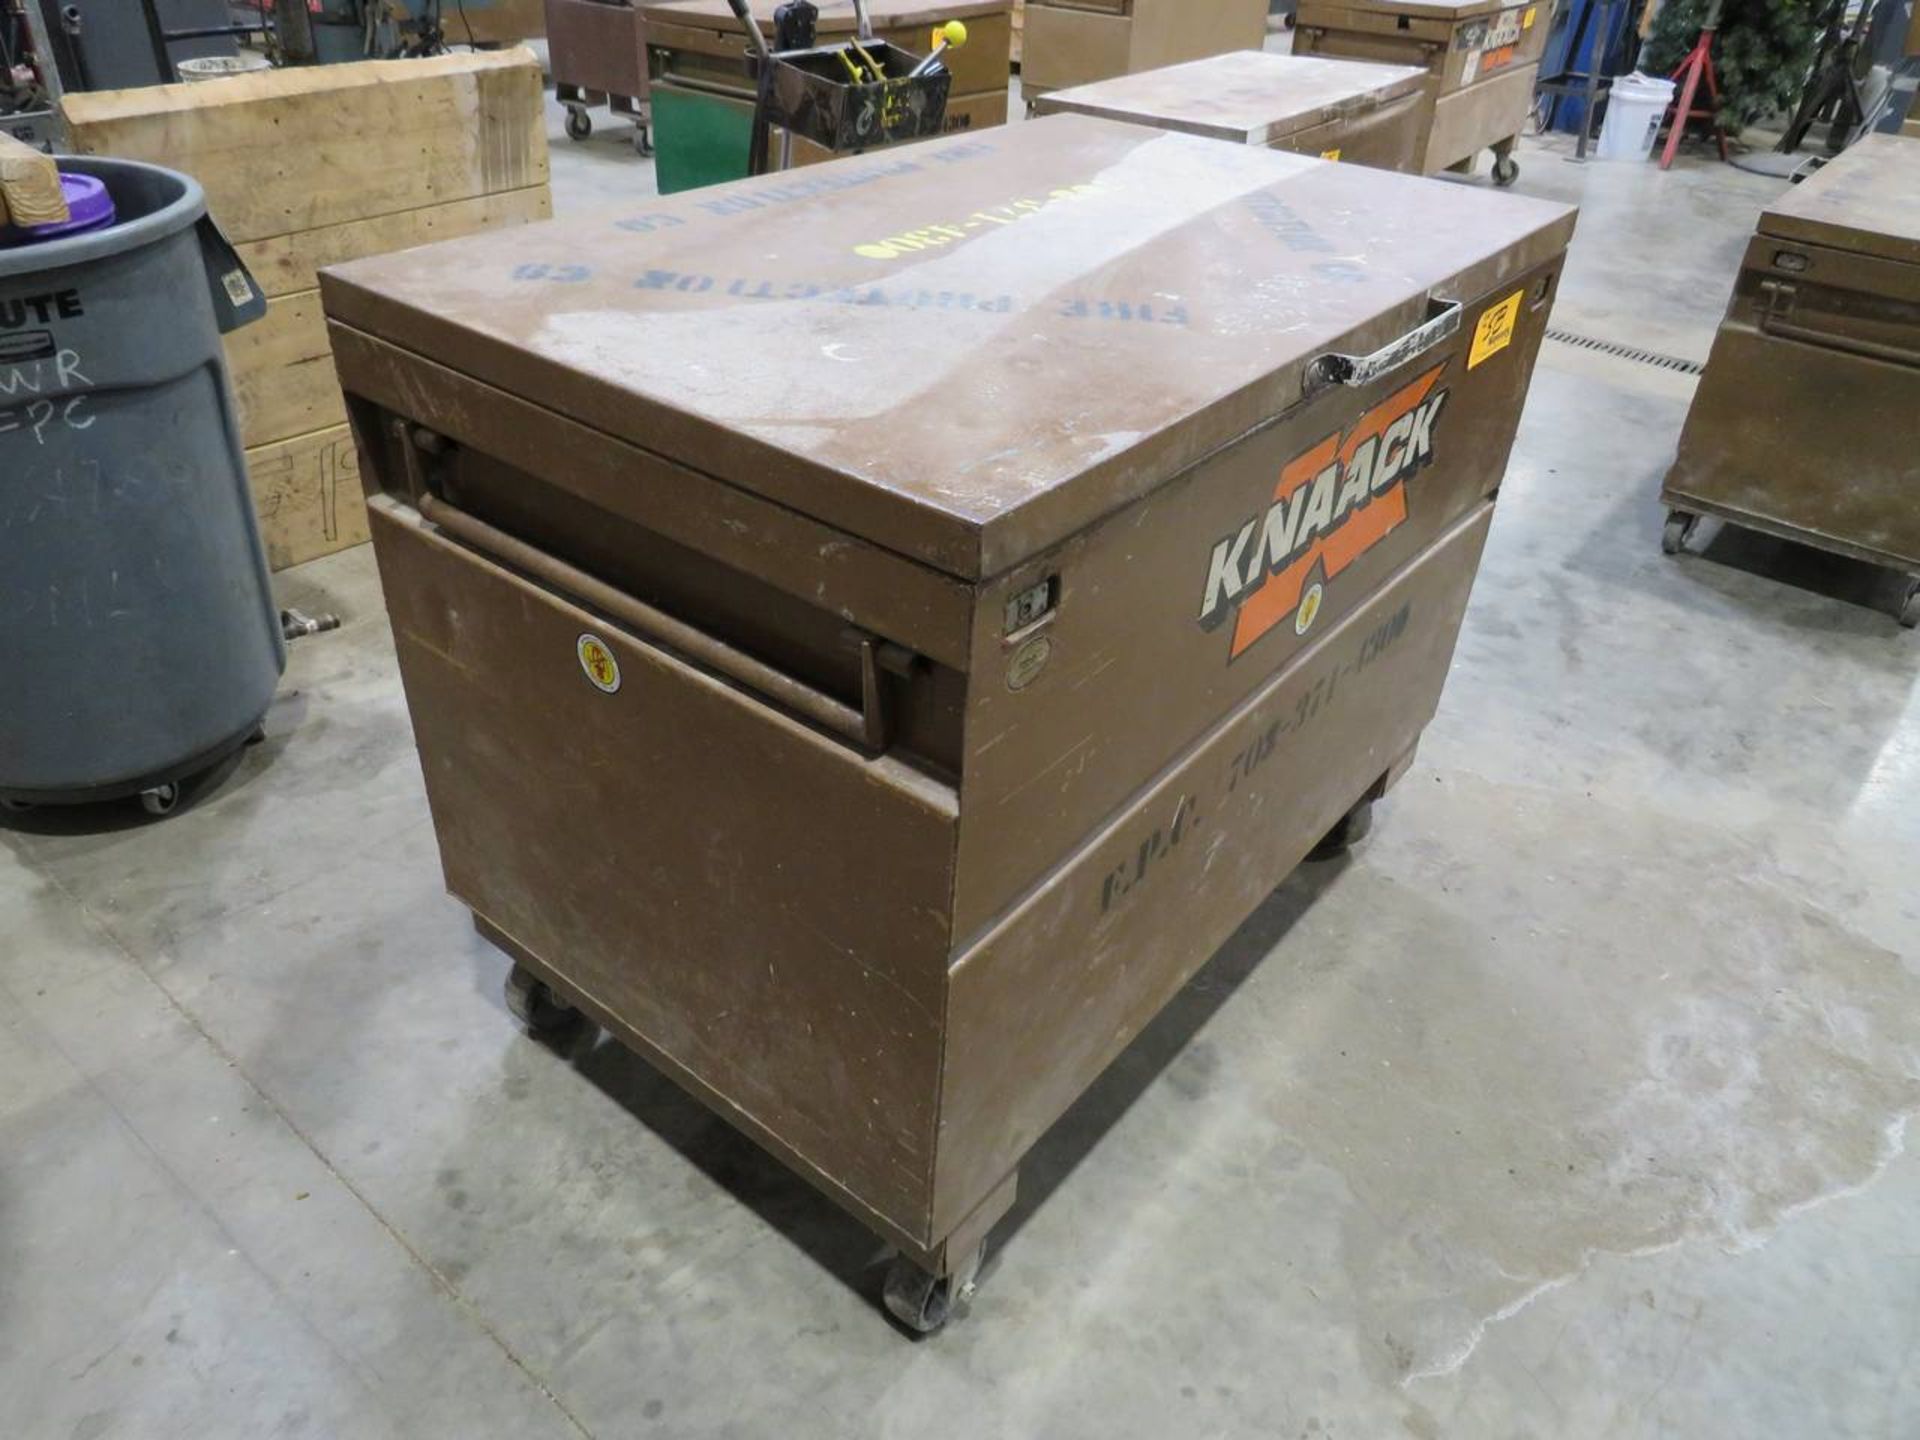 Knaack Approx. 48" W x 30" D x 39-1/2" H Storage Chest - Image 5 of 7